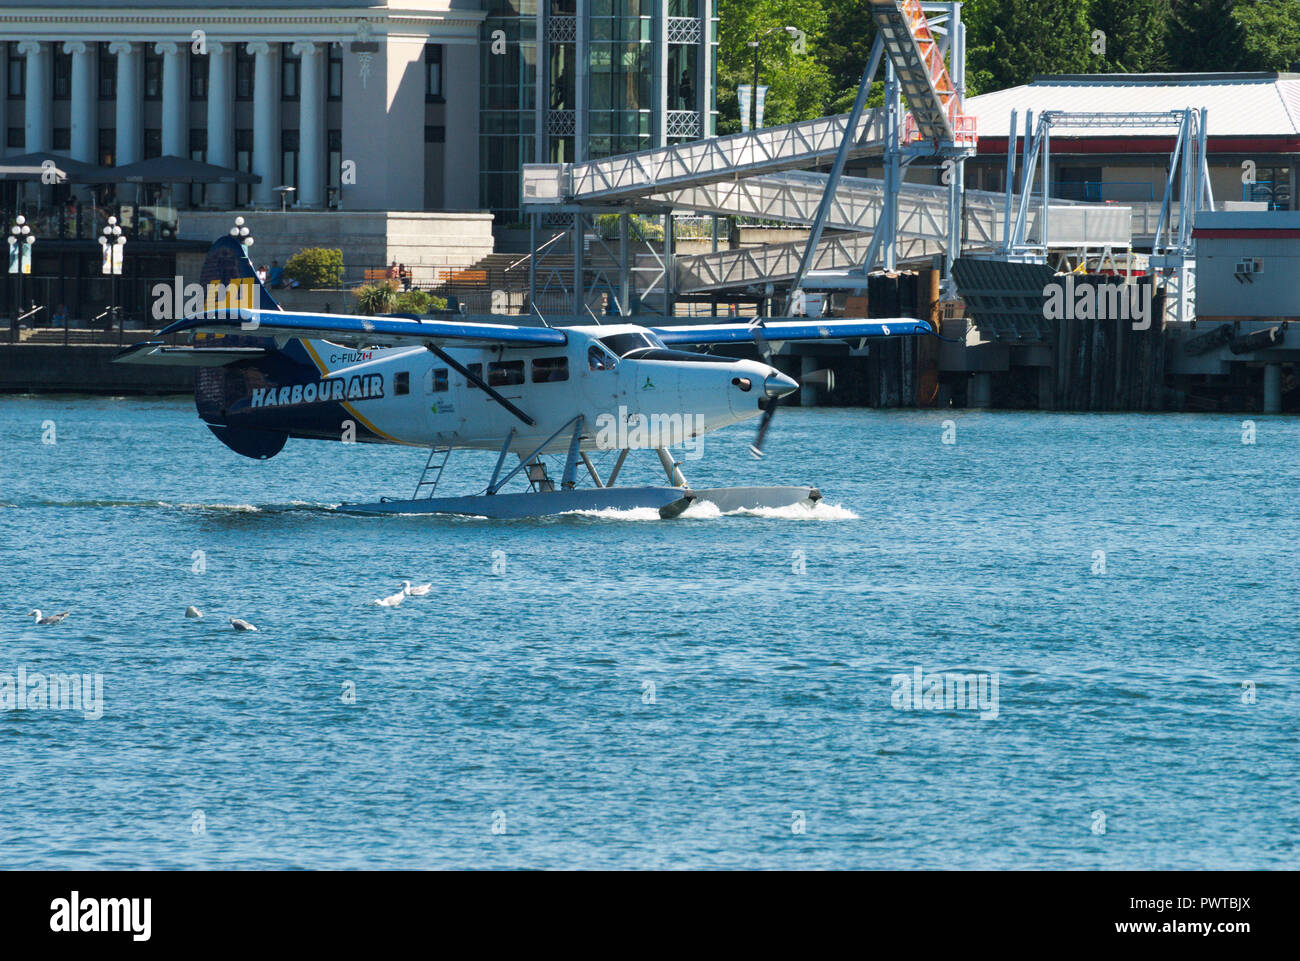 A float plane prepares for take off from the inner harbor in Victoria, British Columbia, Canada Stock Photo